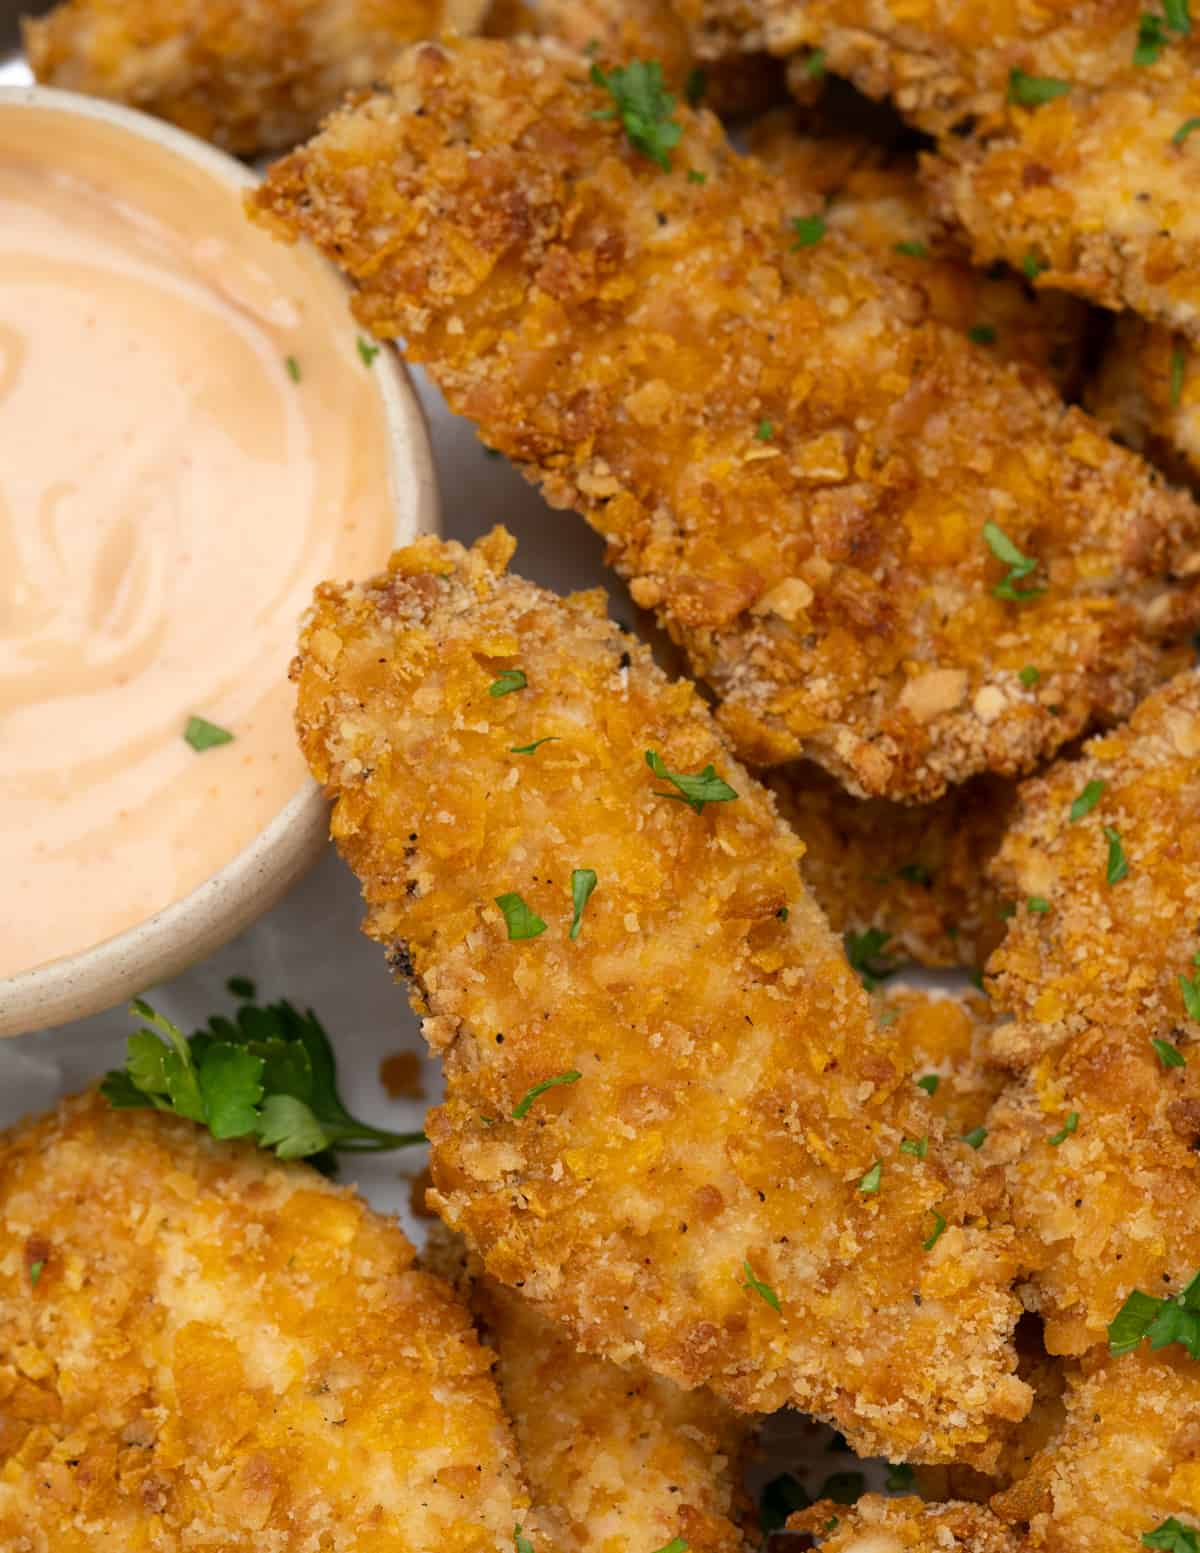 chicken breast strips marinated in seasoned buttermilk and coated with a crispy coating of cornflakes and crackers.